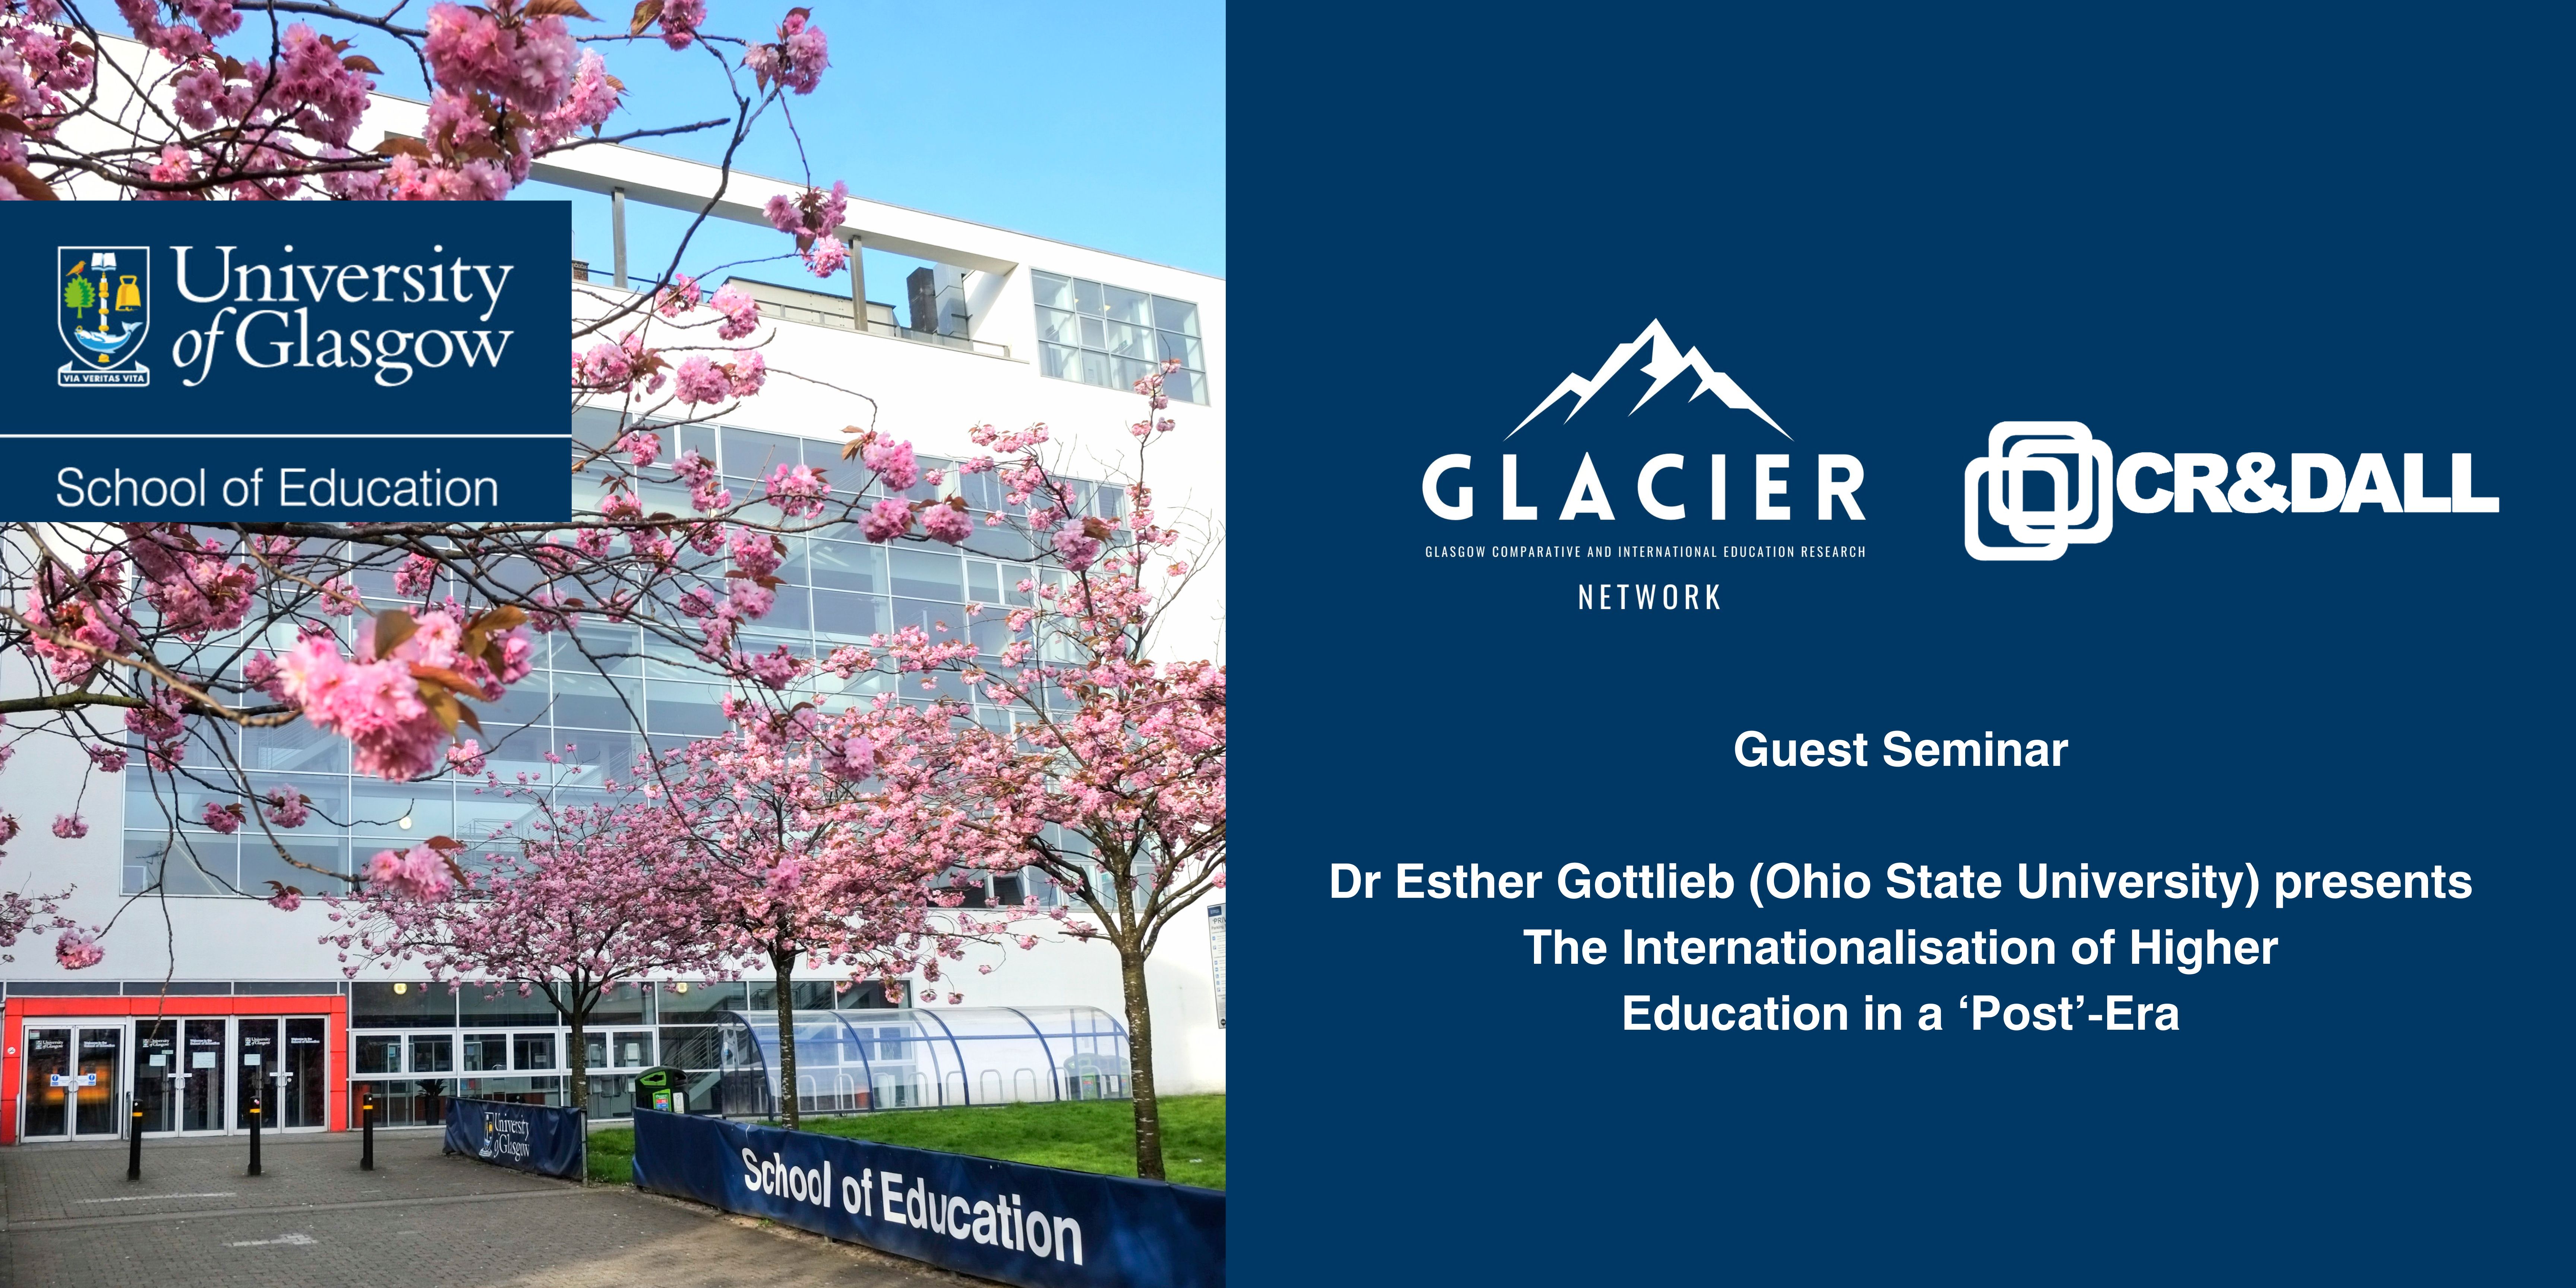 GLACIER and CR&DALL Guest Seminar  Dr Esther Gottlieb (Ohio State University) presents The Internationalisation of Higher  Education in a ‘Post’-Era